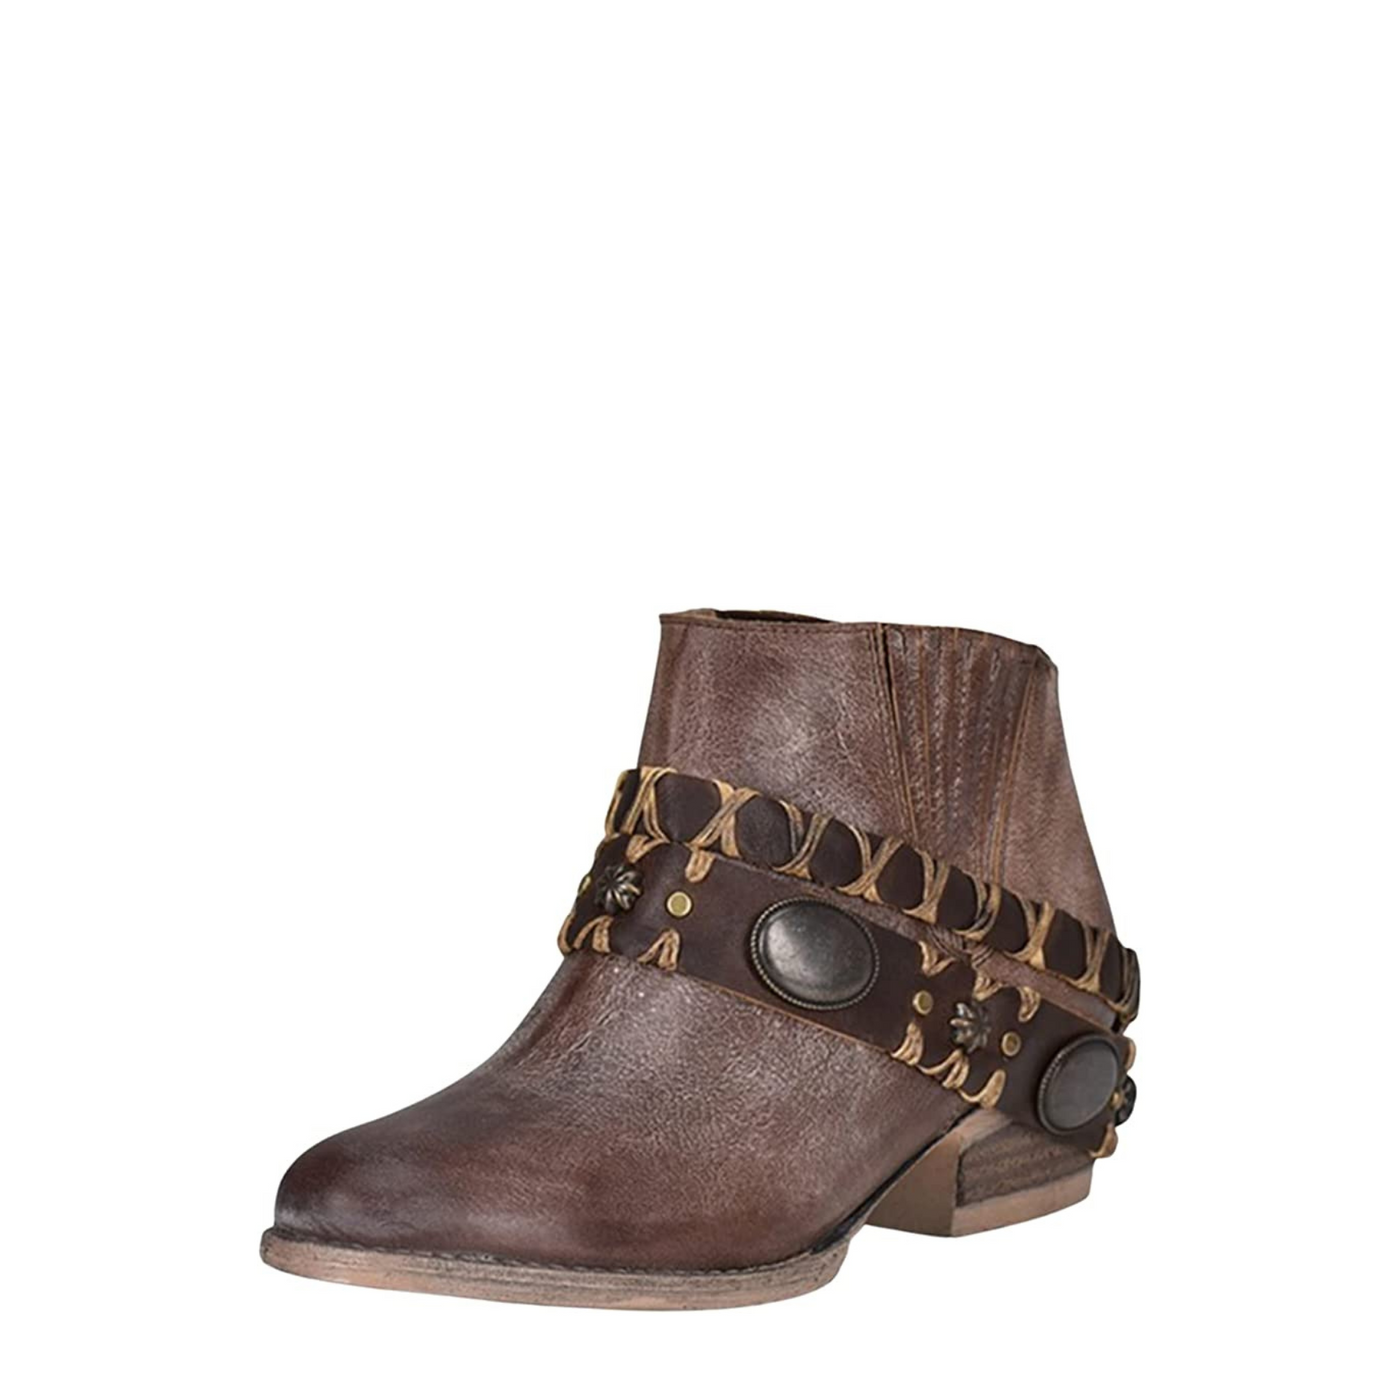 Corral | Harness & Studs | Dark Brown - Outback Traders Australia